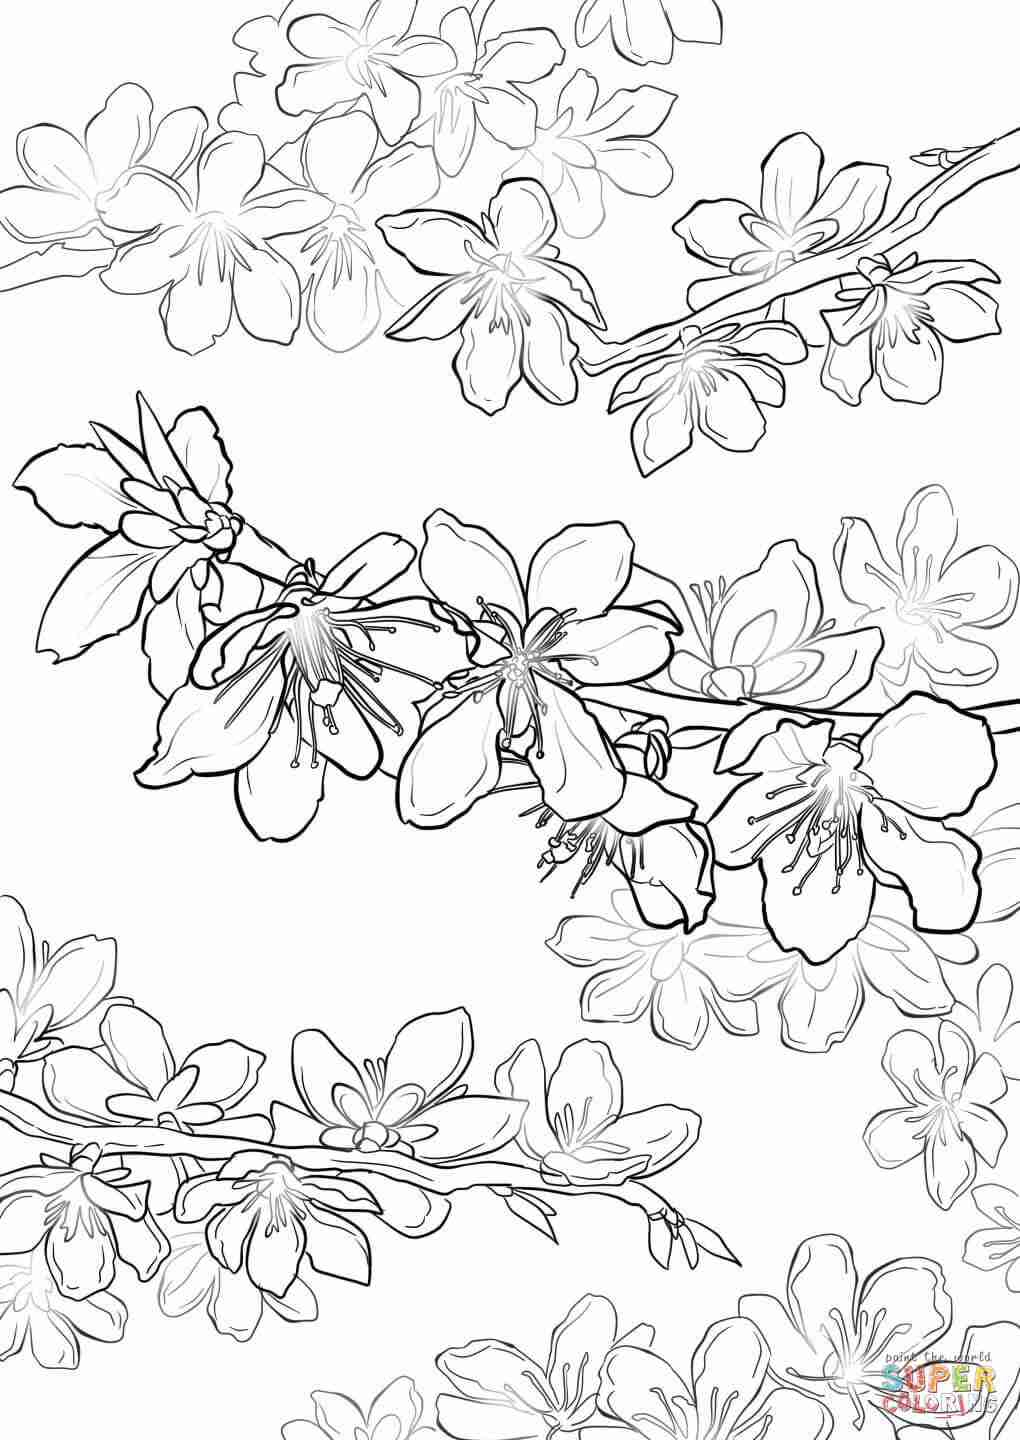 Japanese Cherry Blossom Coloring Pages at GetDrawings.com ...